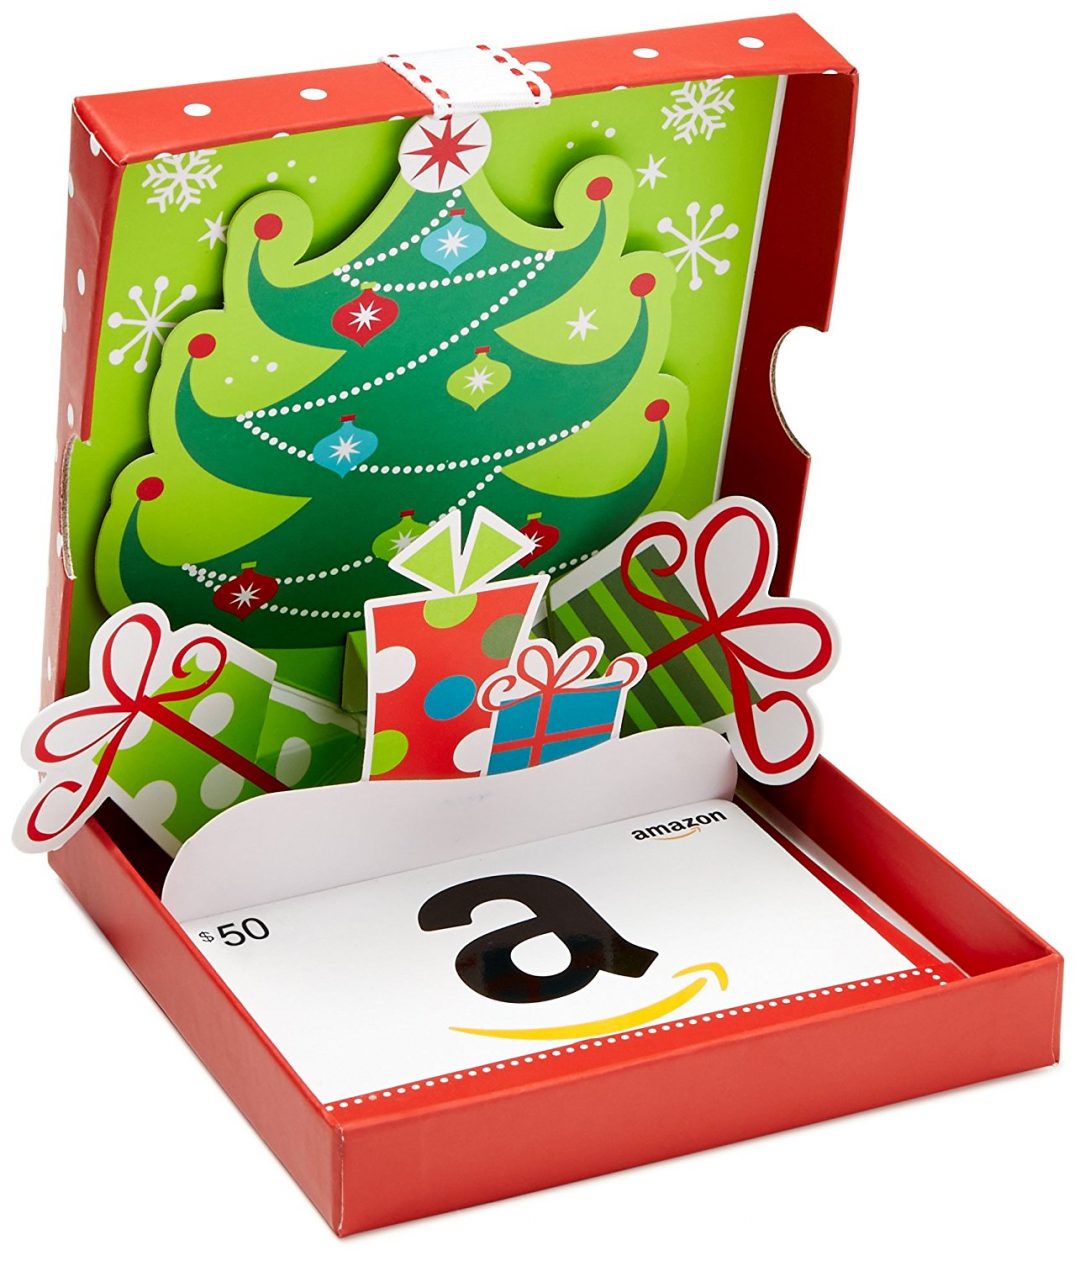 50 Amazon Christmas Gift Card Giveaway! Ends 12/25/17 Freebie Depot